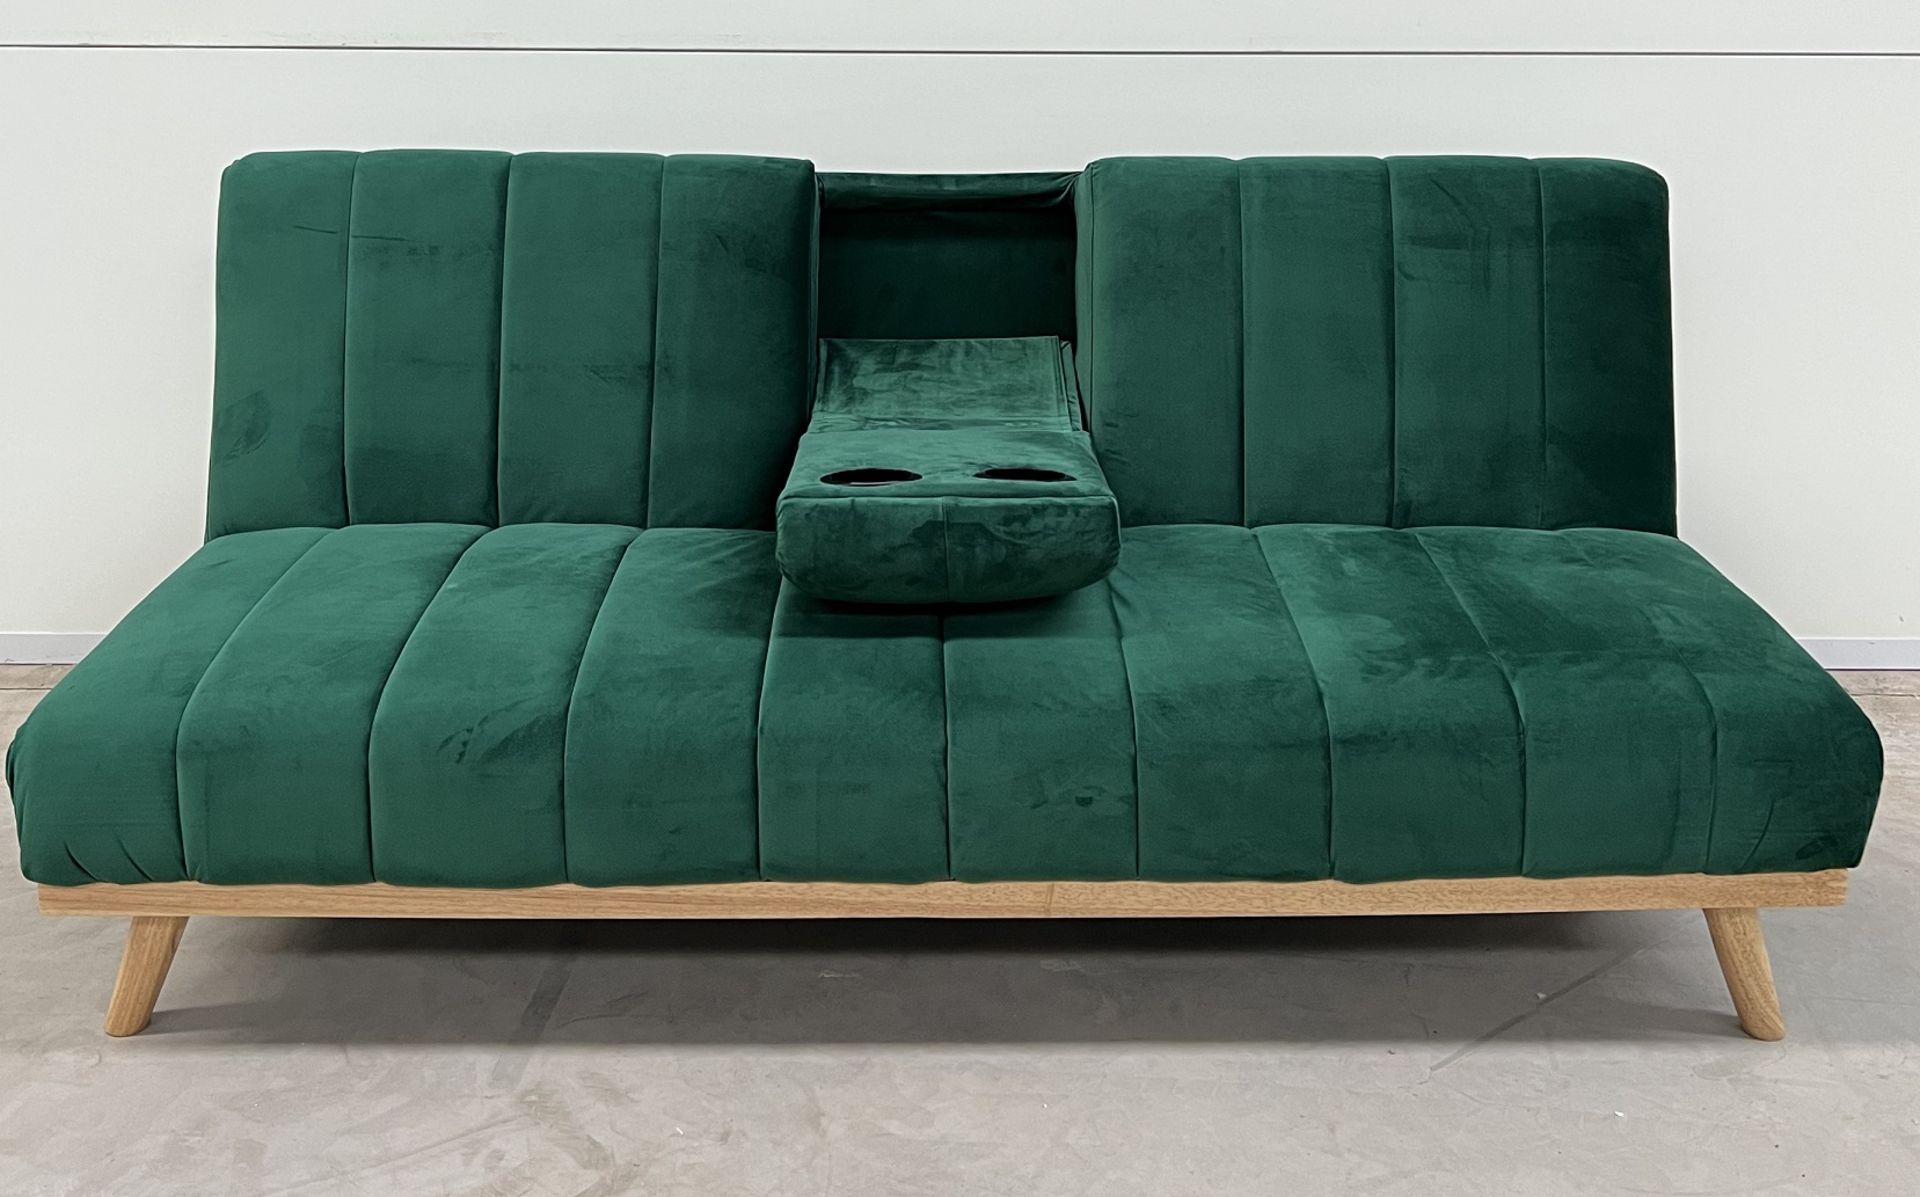 Etta Green Plush Velvet Sofa Bed Defined By It's Soft Curves And Low Rise Design As Well As Subtle - Image 2 of 3